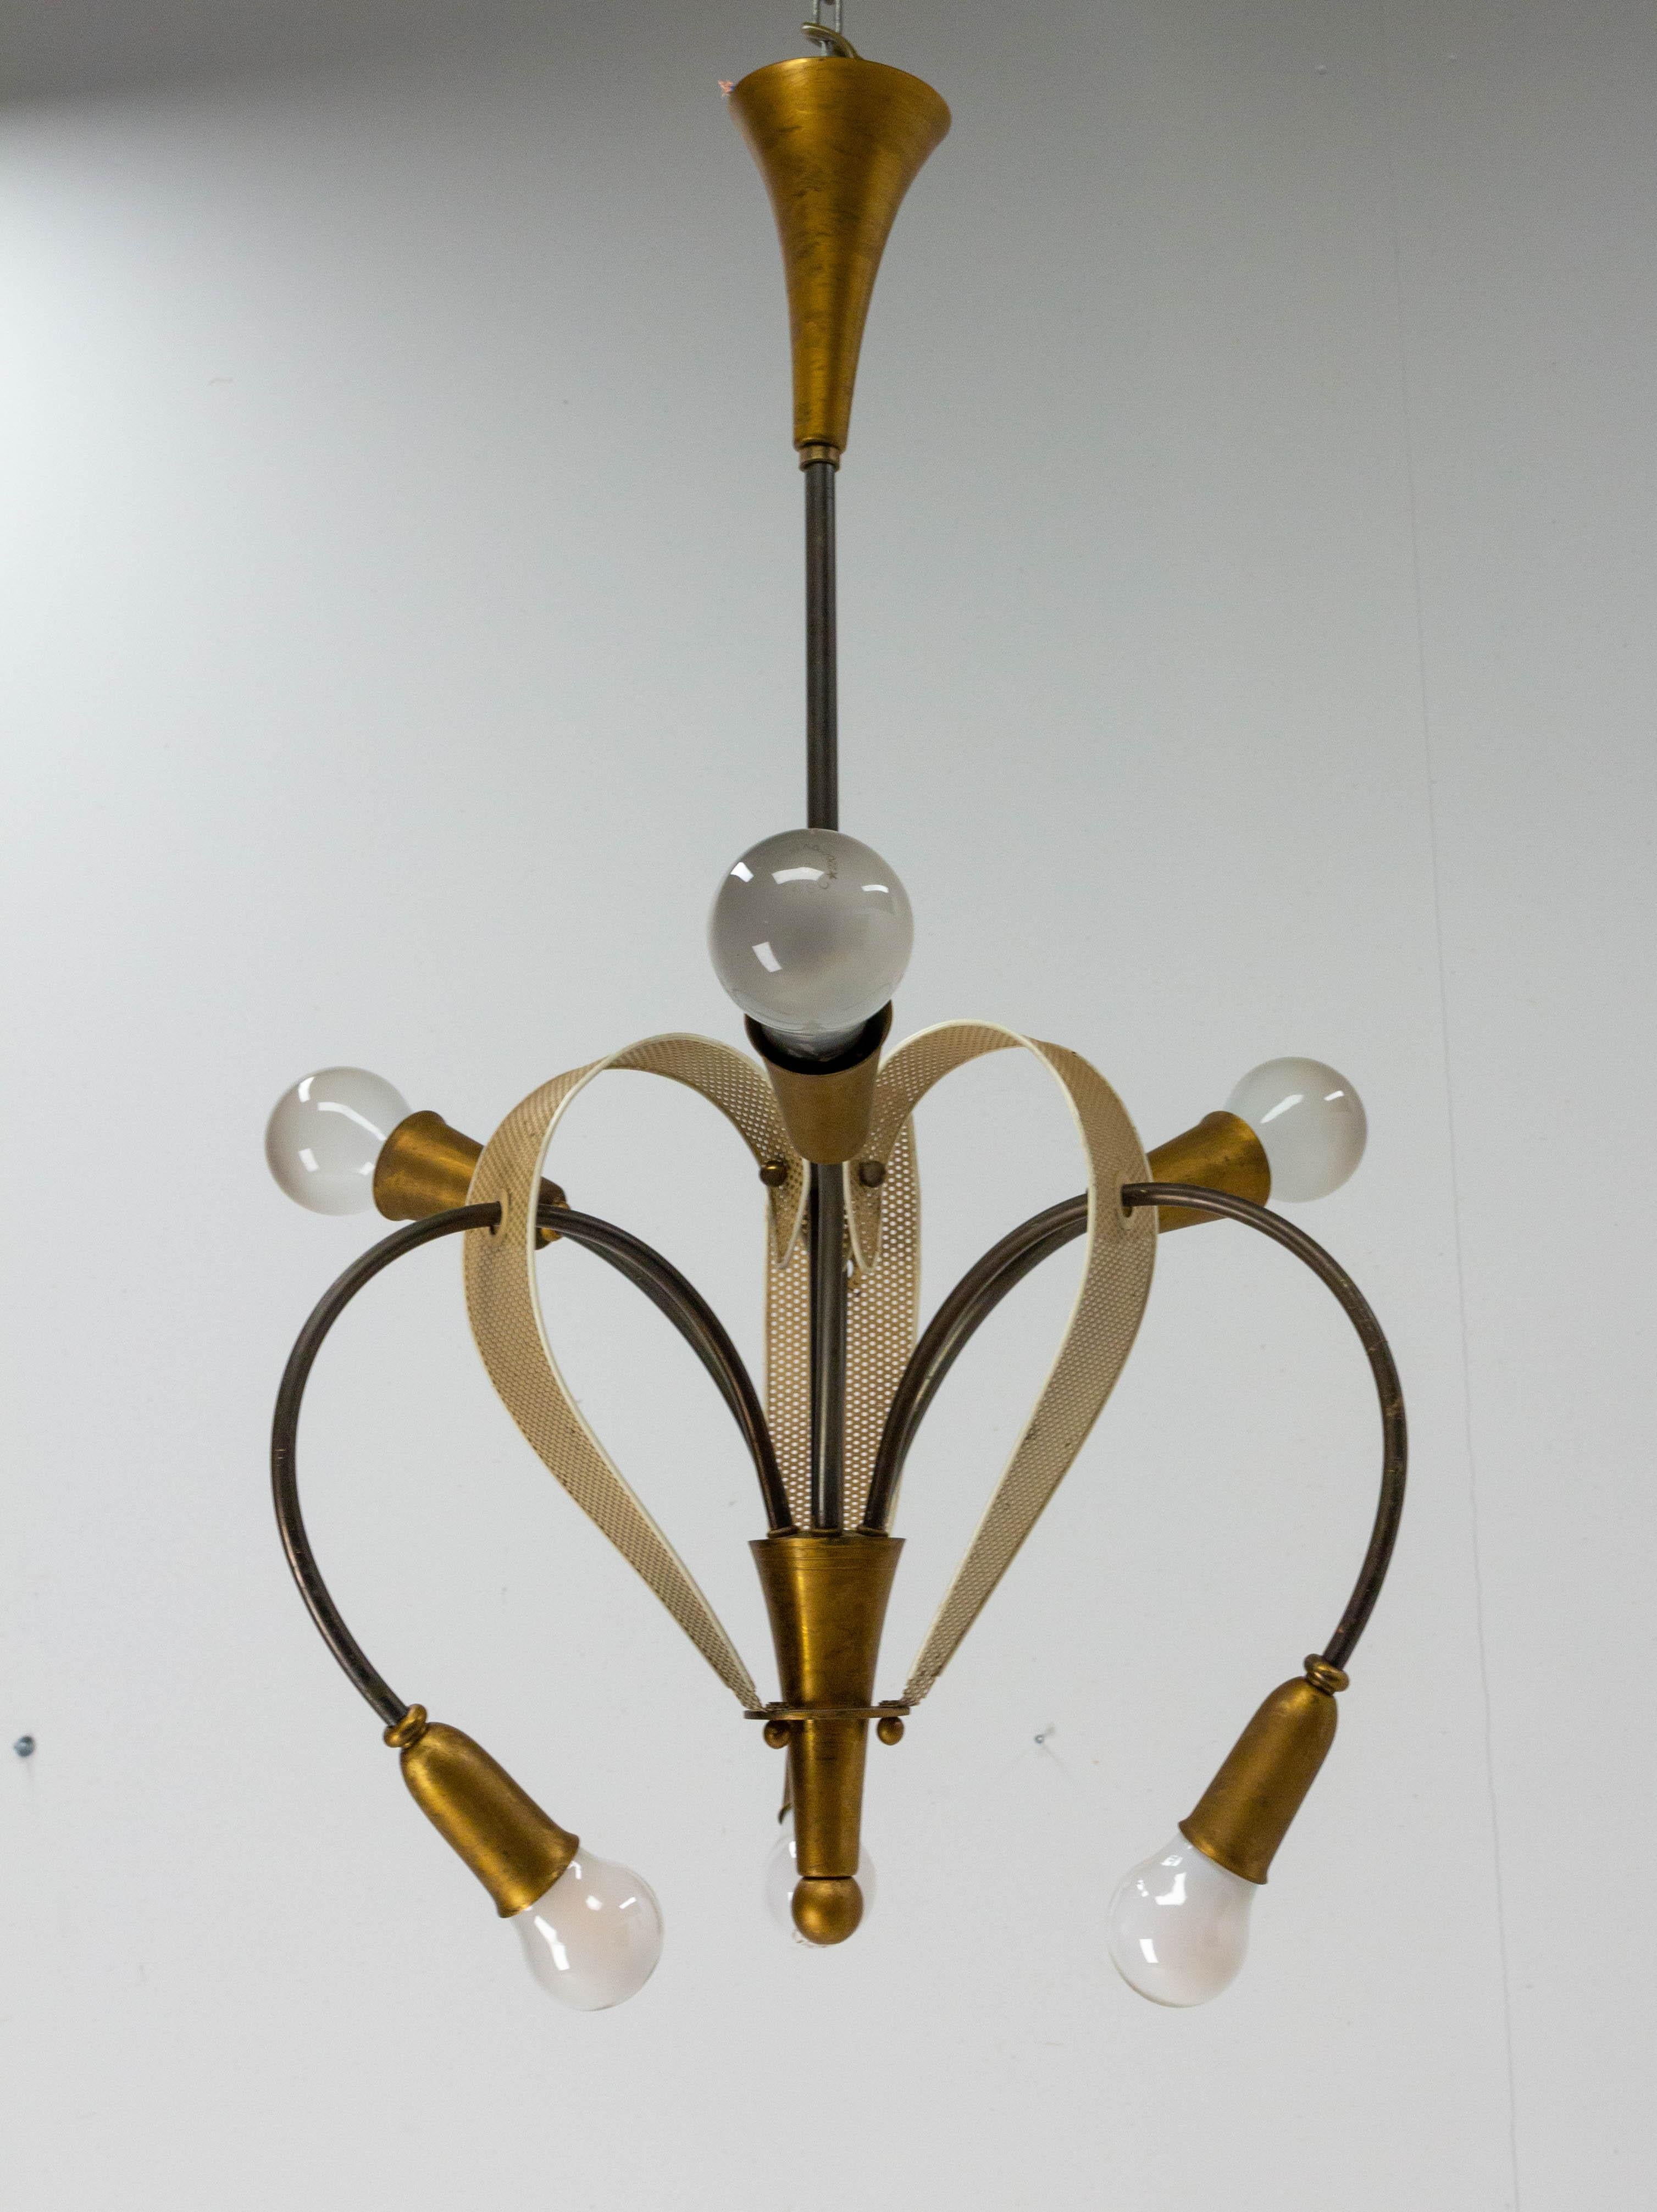 20th Century French Chandelier Ceiling Pendant Lustre c. 1950 by Pierre Guariche for Disderot For Sale